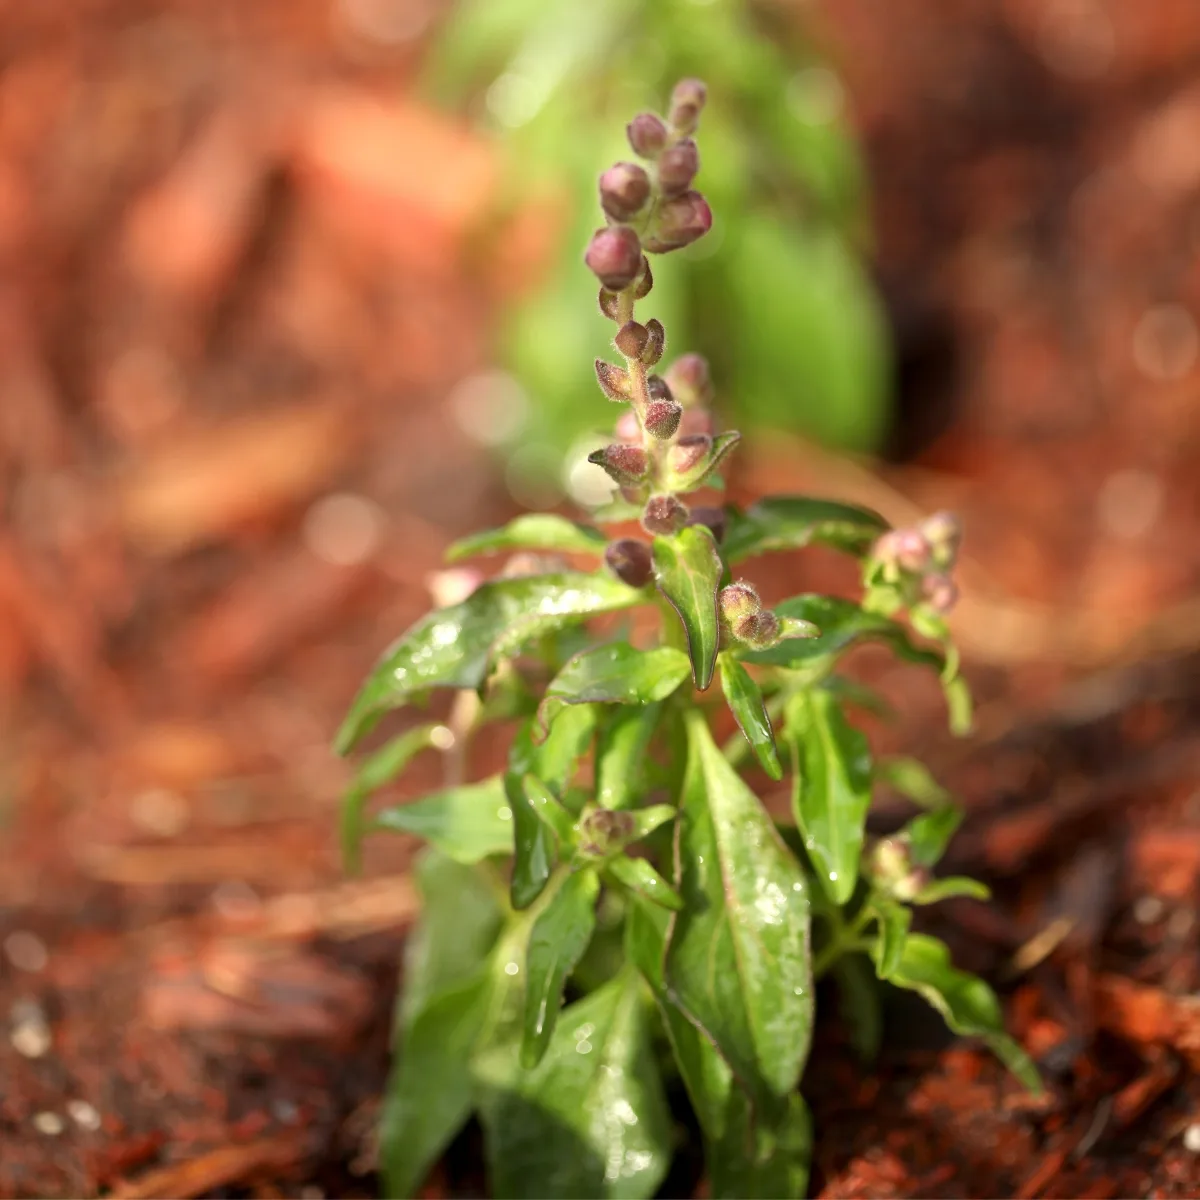 snapdragon seedling with flower buds forming